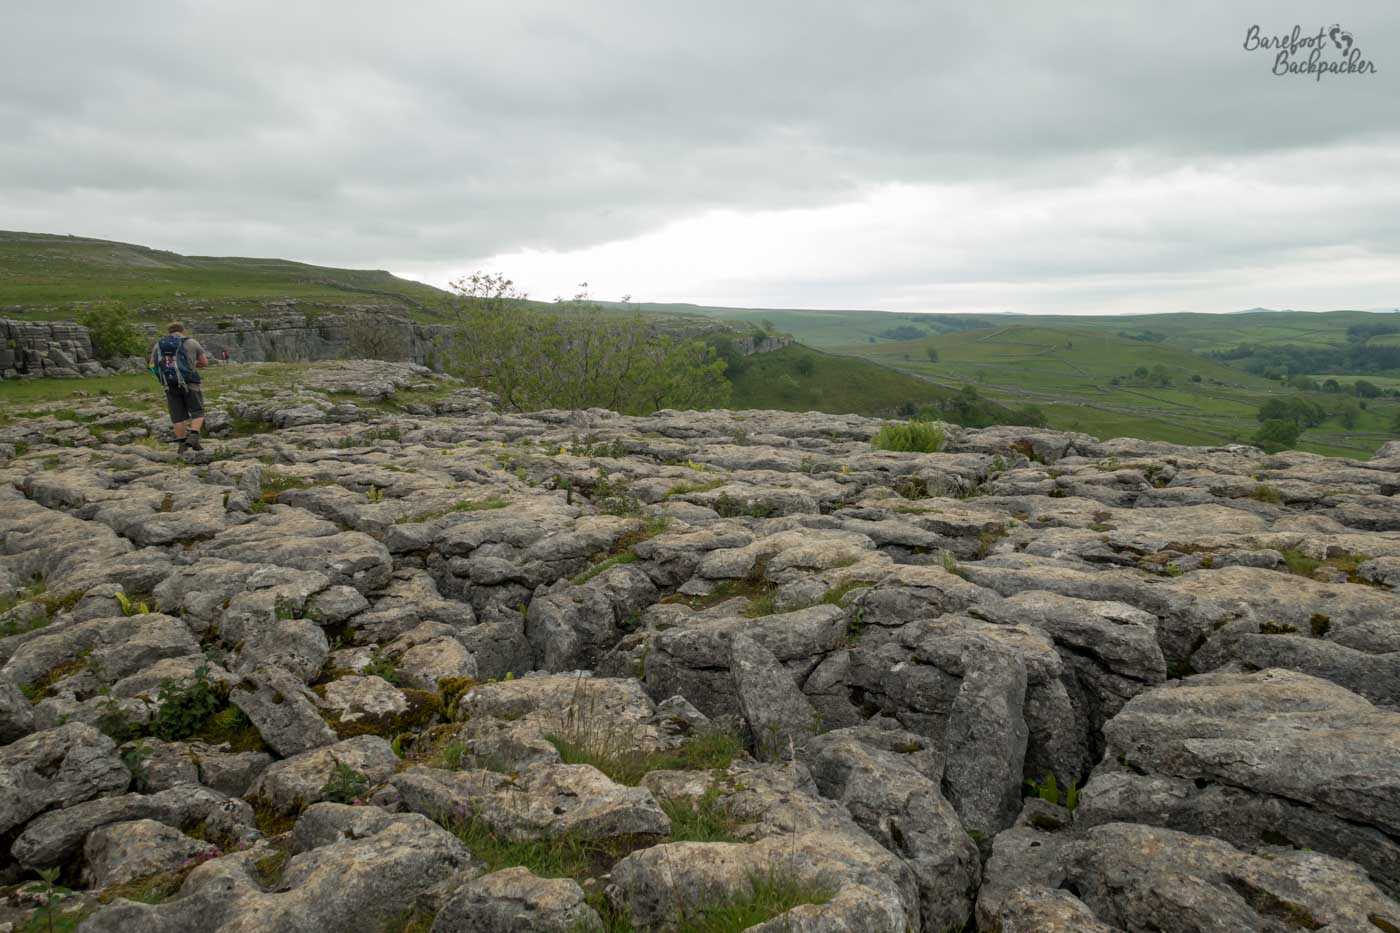 Ragged rocks cover the bottom of shot; they drop sharply off mid-shot and distant, lower, fields can be seen. Someone is walking on the far left of shot over the rocks.